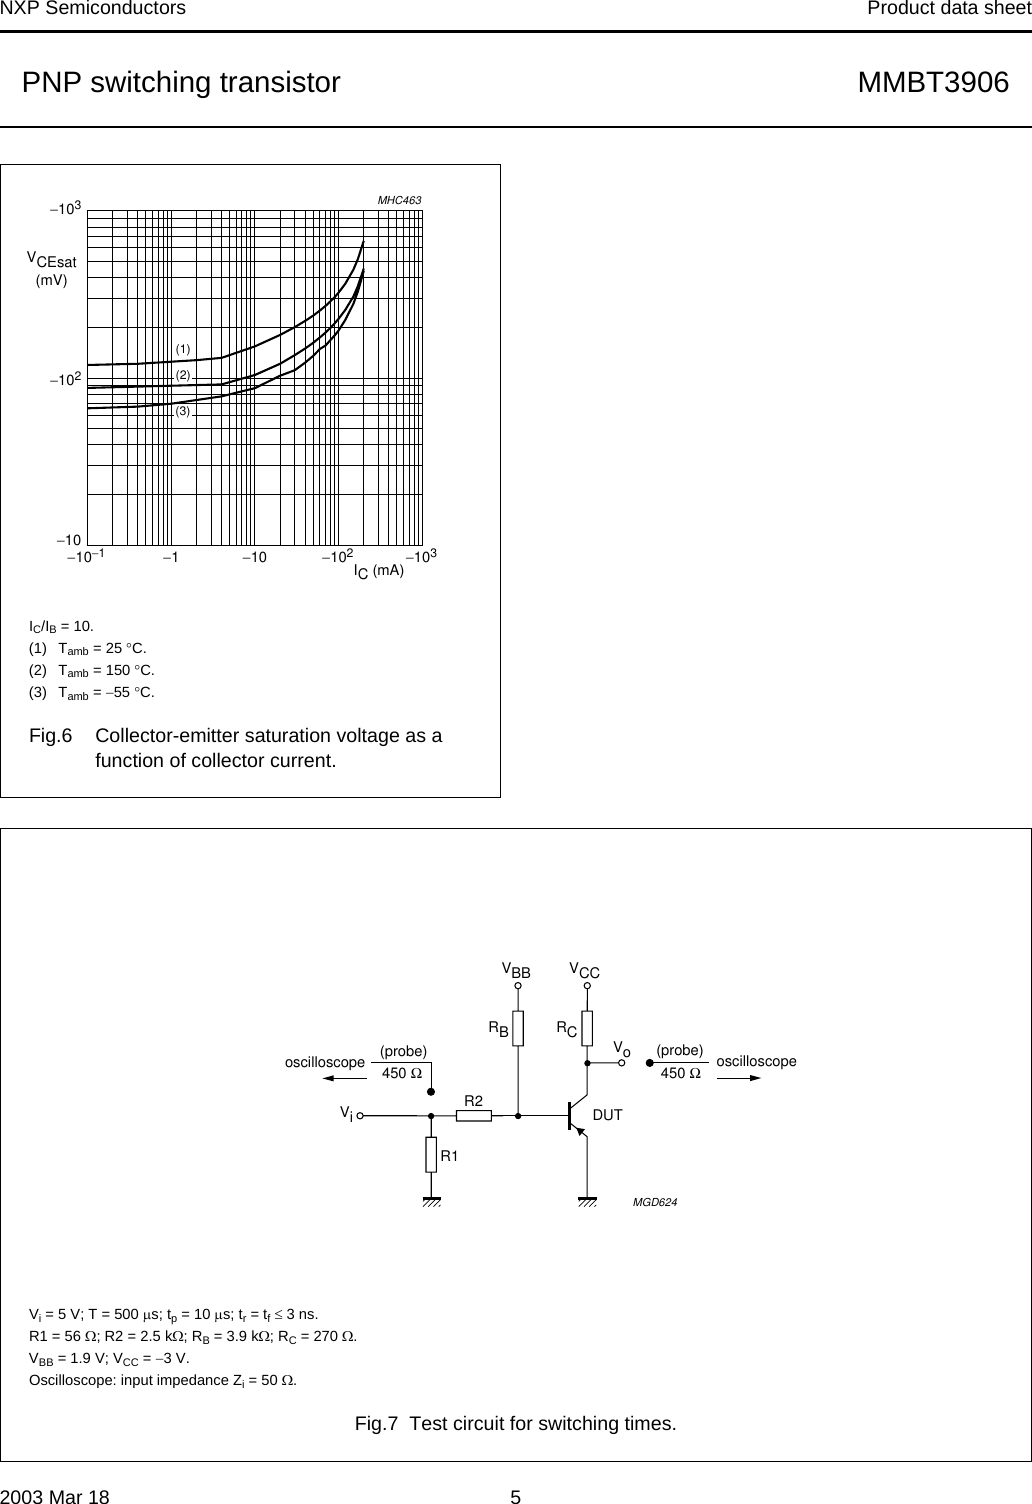 Page 5 of 8 - MMBT3906 PNP Switching Transistor Nxp